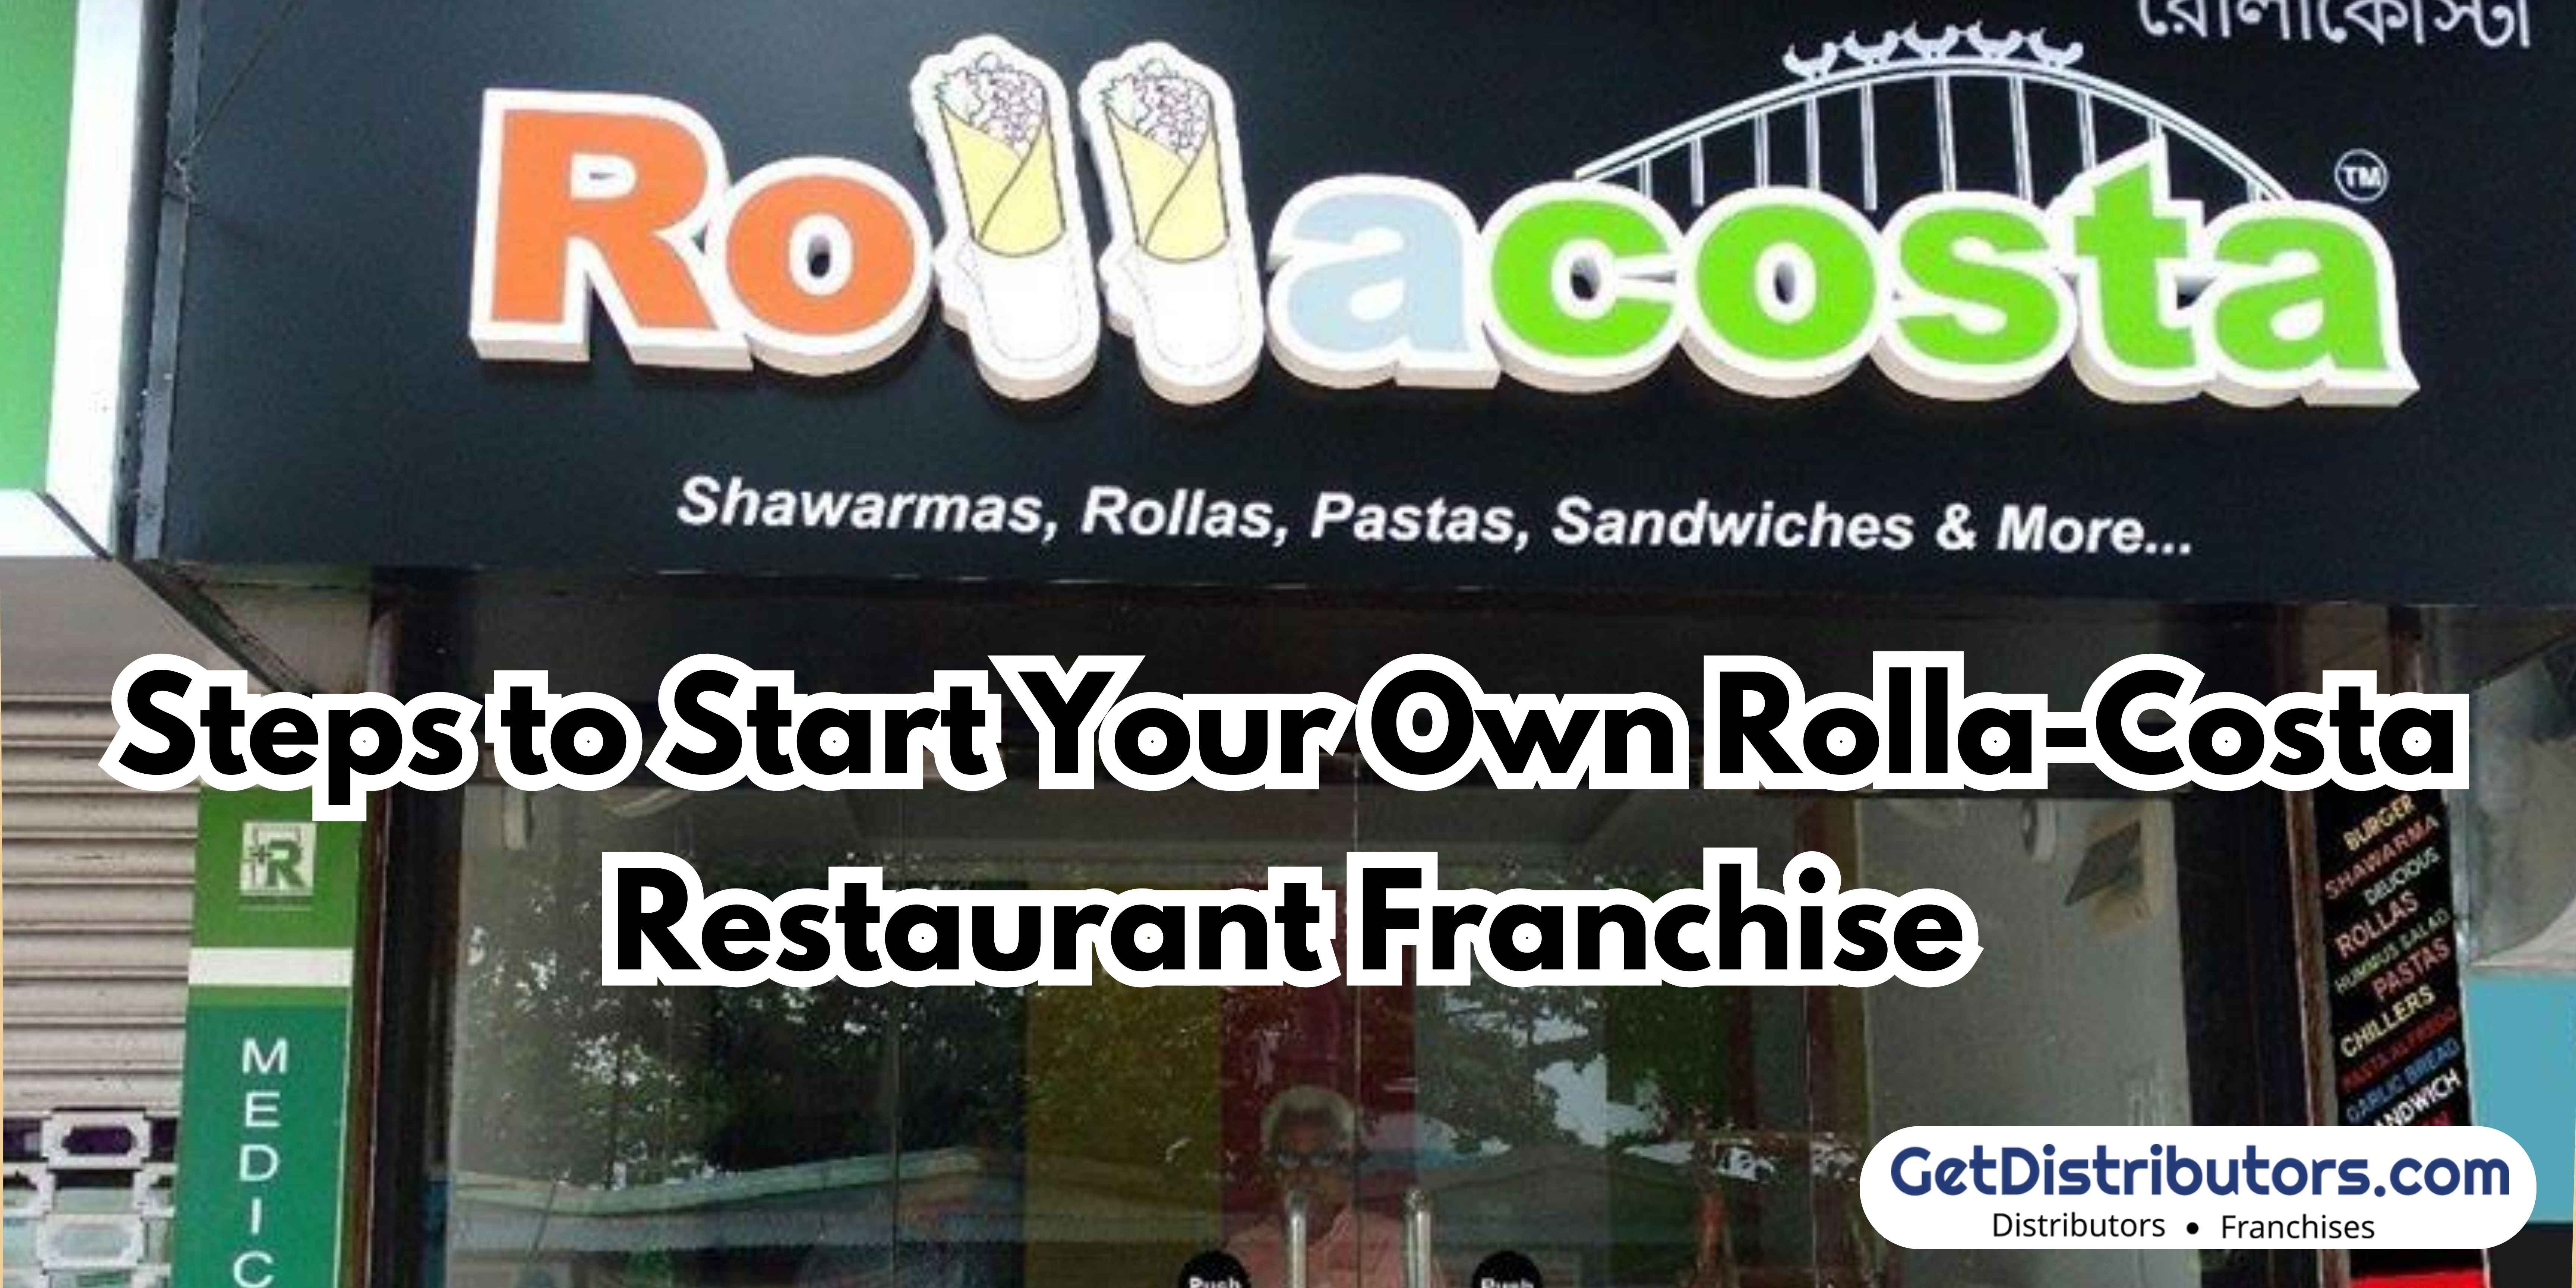 Steps to Start Your Own Rolla-Costa Restaurant Franchise